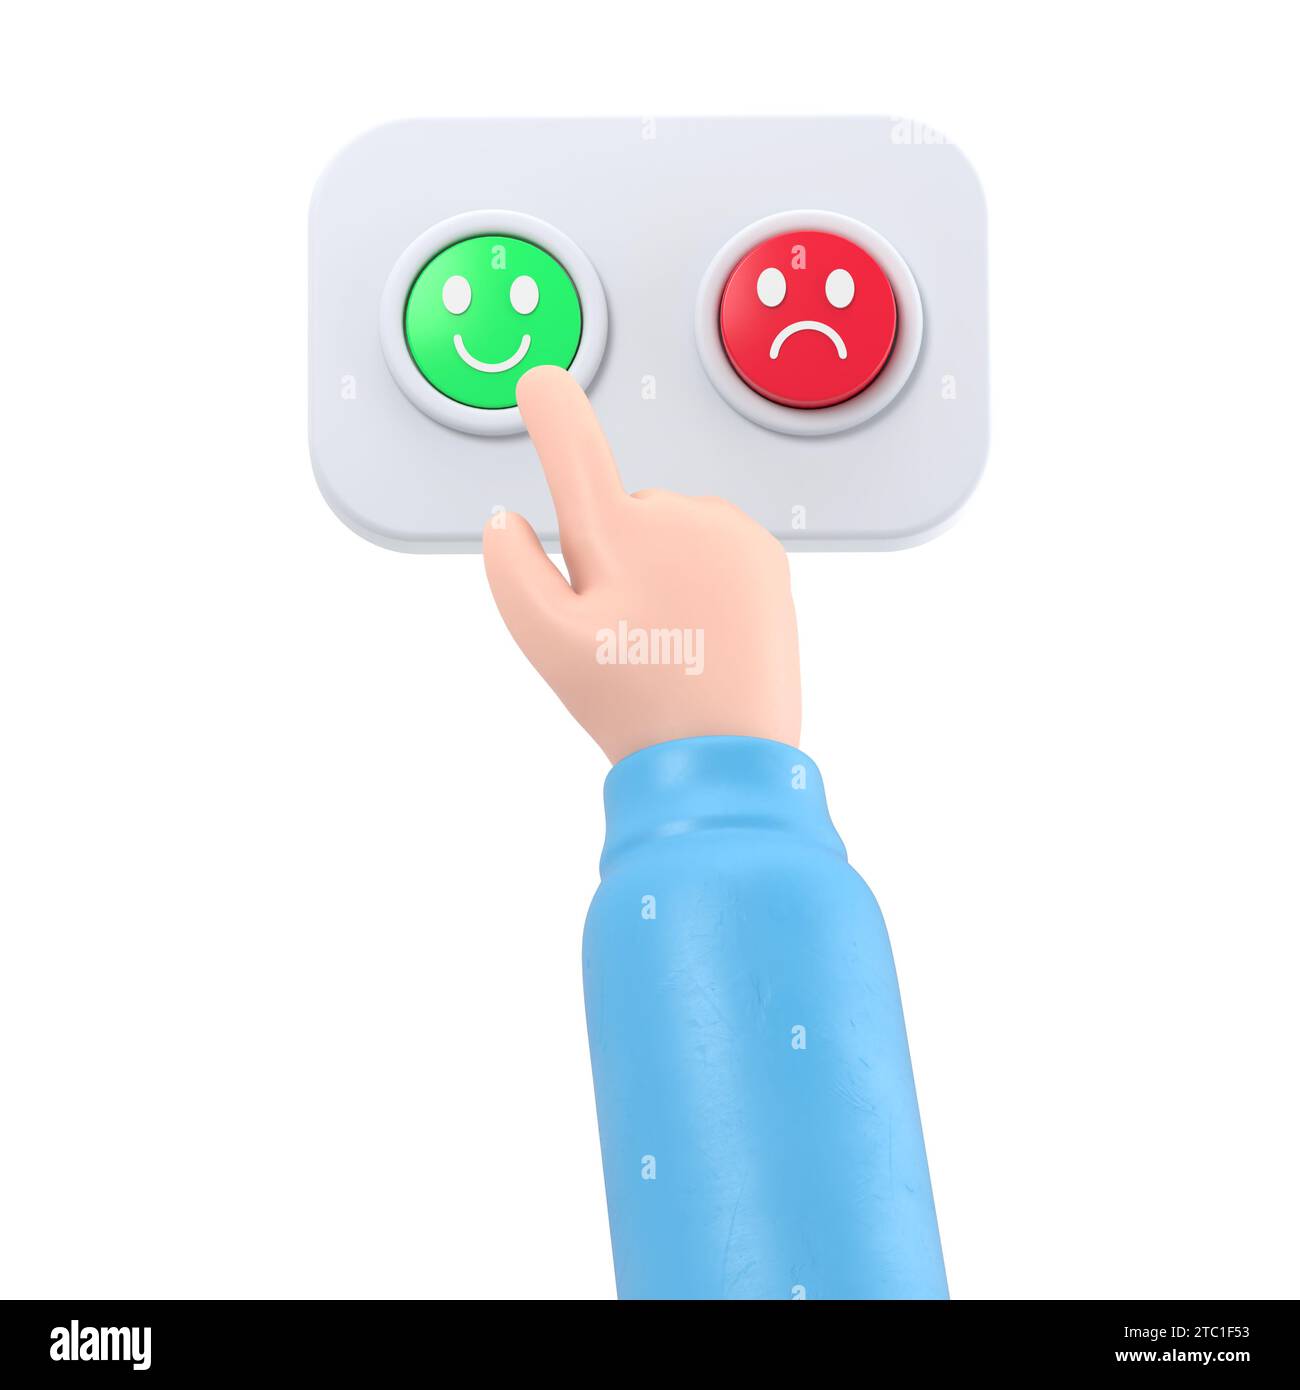 Satisfied customer cartoon hand presses the green button. Business or market clip art. Positive experience emotion.3D rendering on white background. Stock Photo